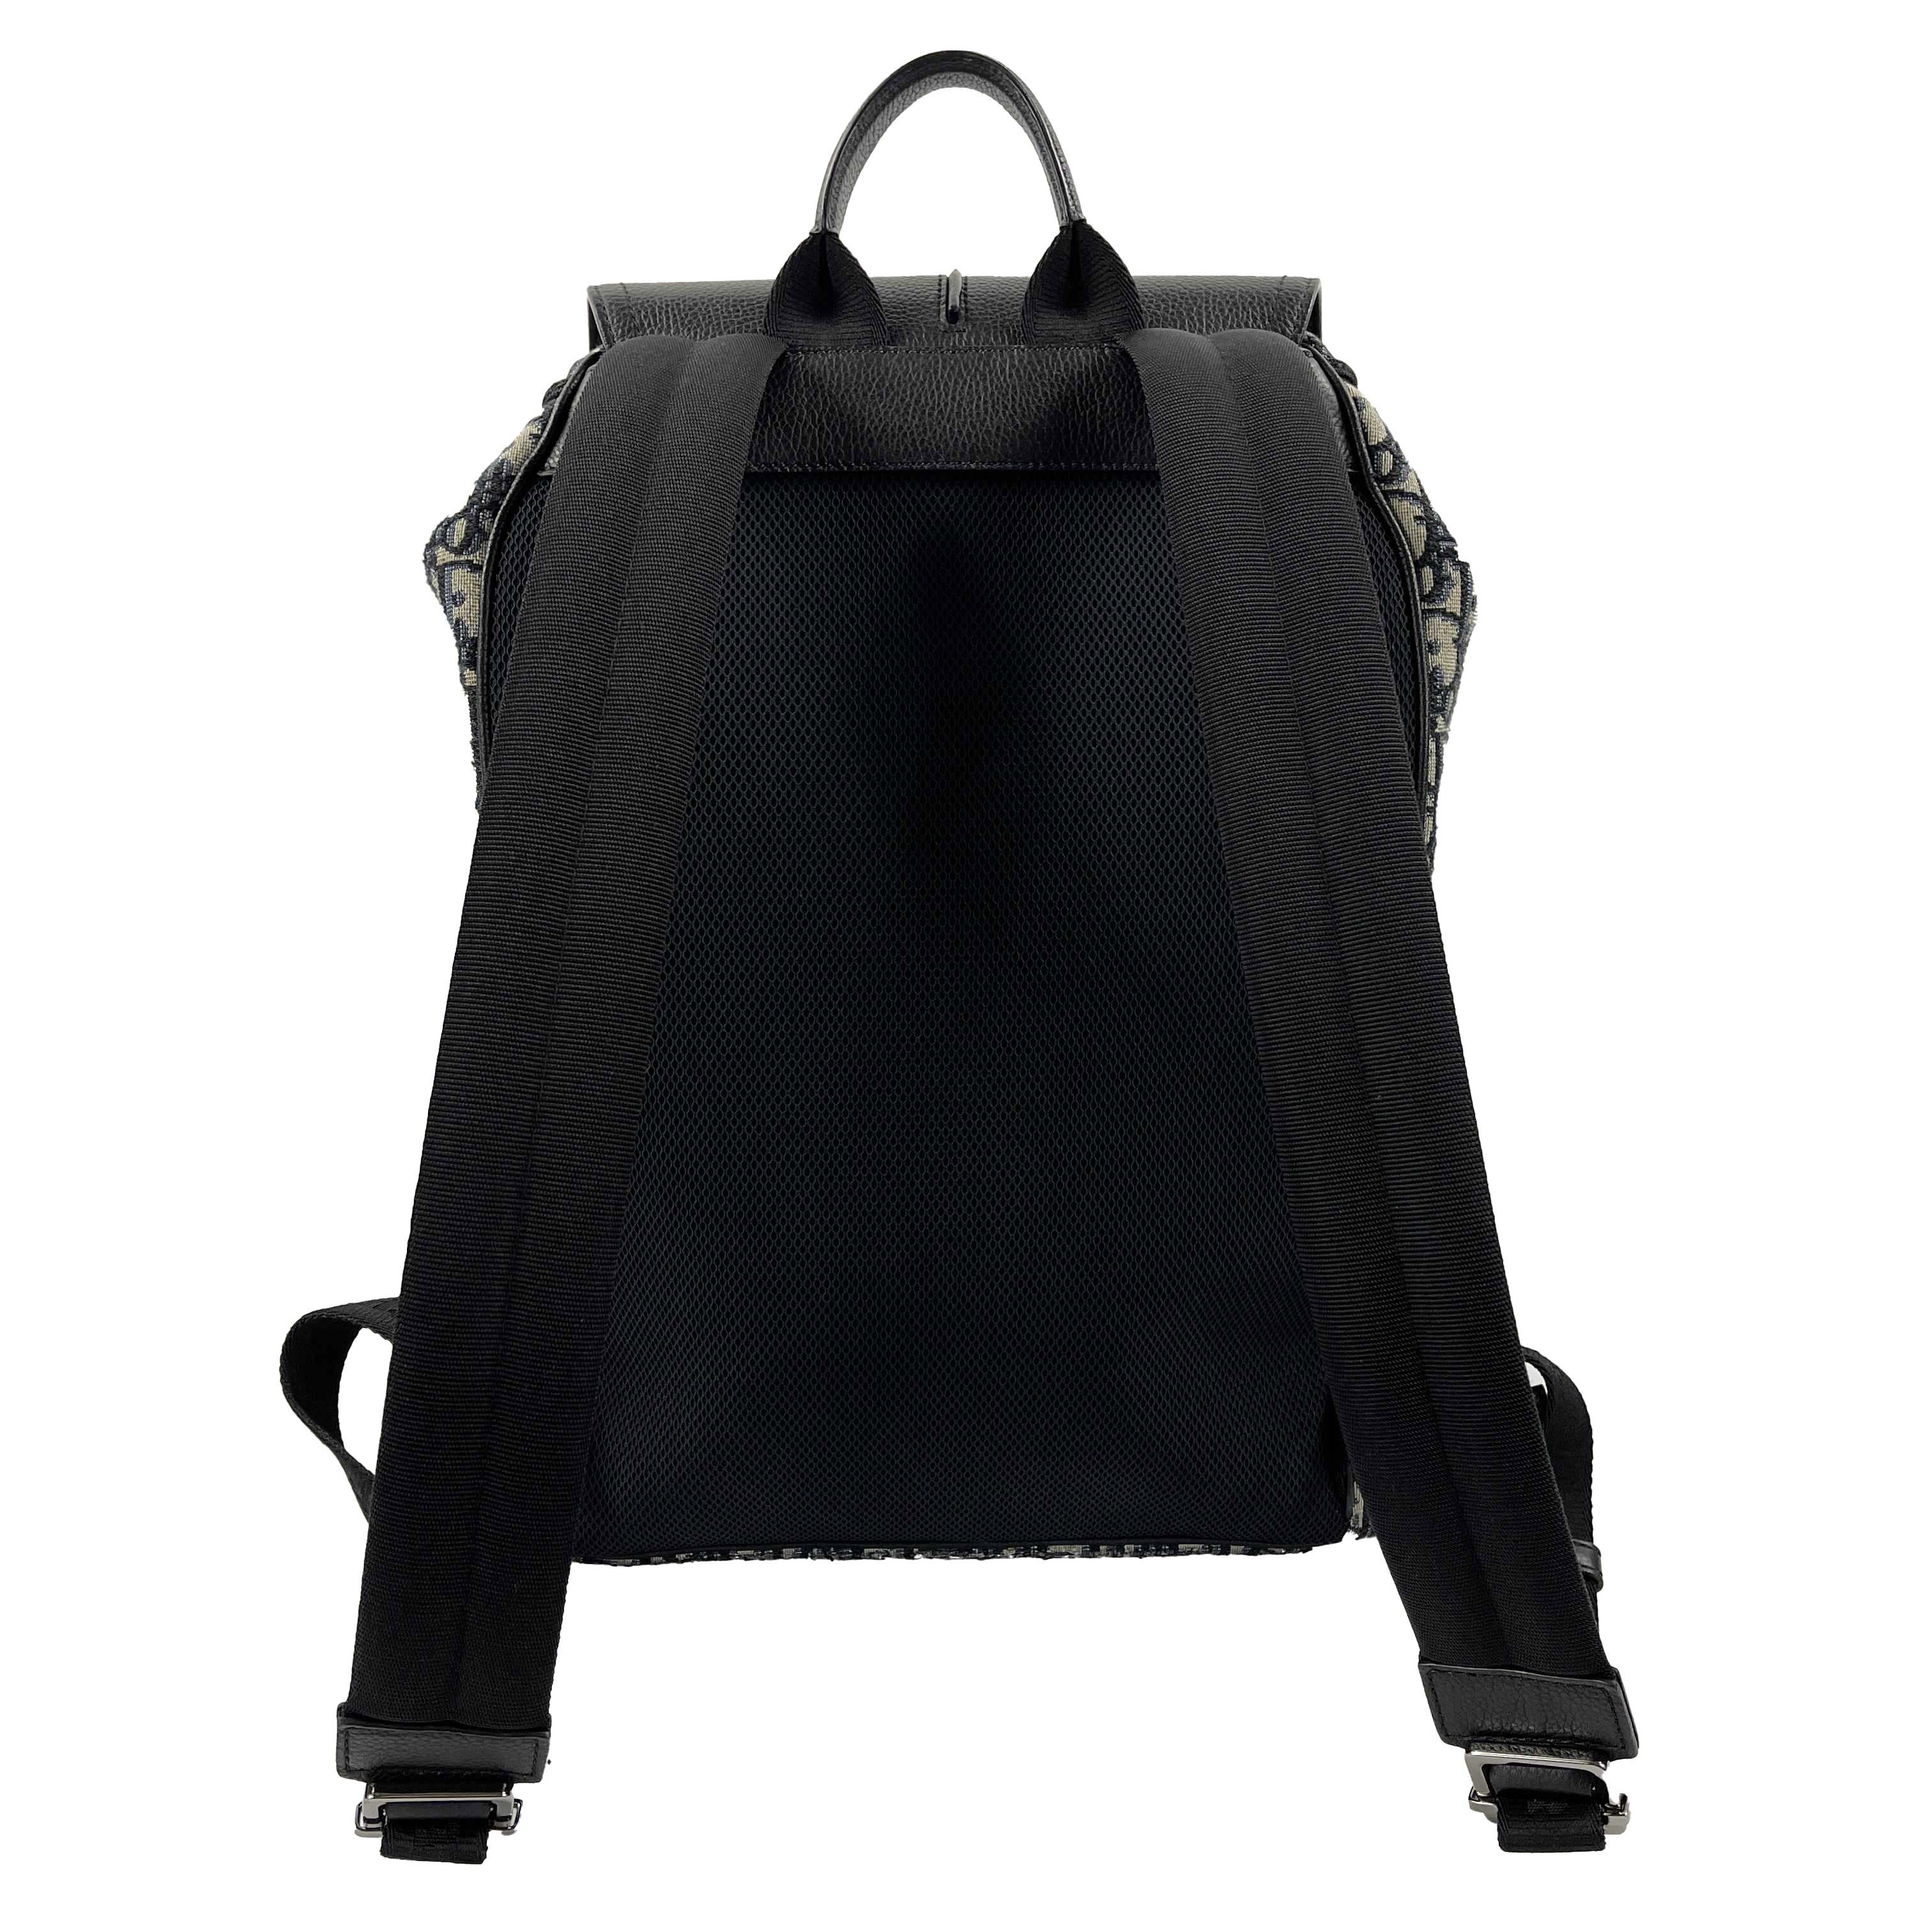 Dior - Excellent - Motion Backpack Oblique Jacquard Grained Calfskin Leather - Black - Handbag

Description

The Motion backpack is a clever accessory. The streamlined silhouette has a contemporary feel while the beige and black Dior Oblique motif